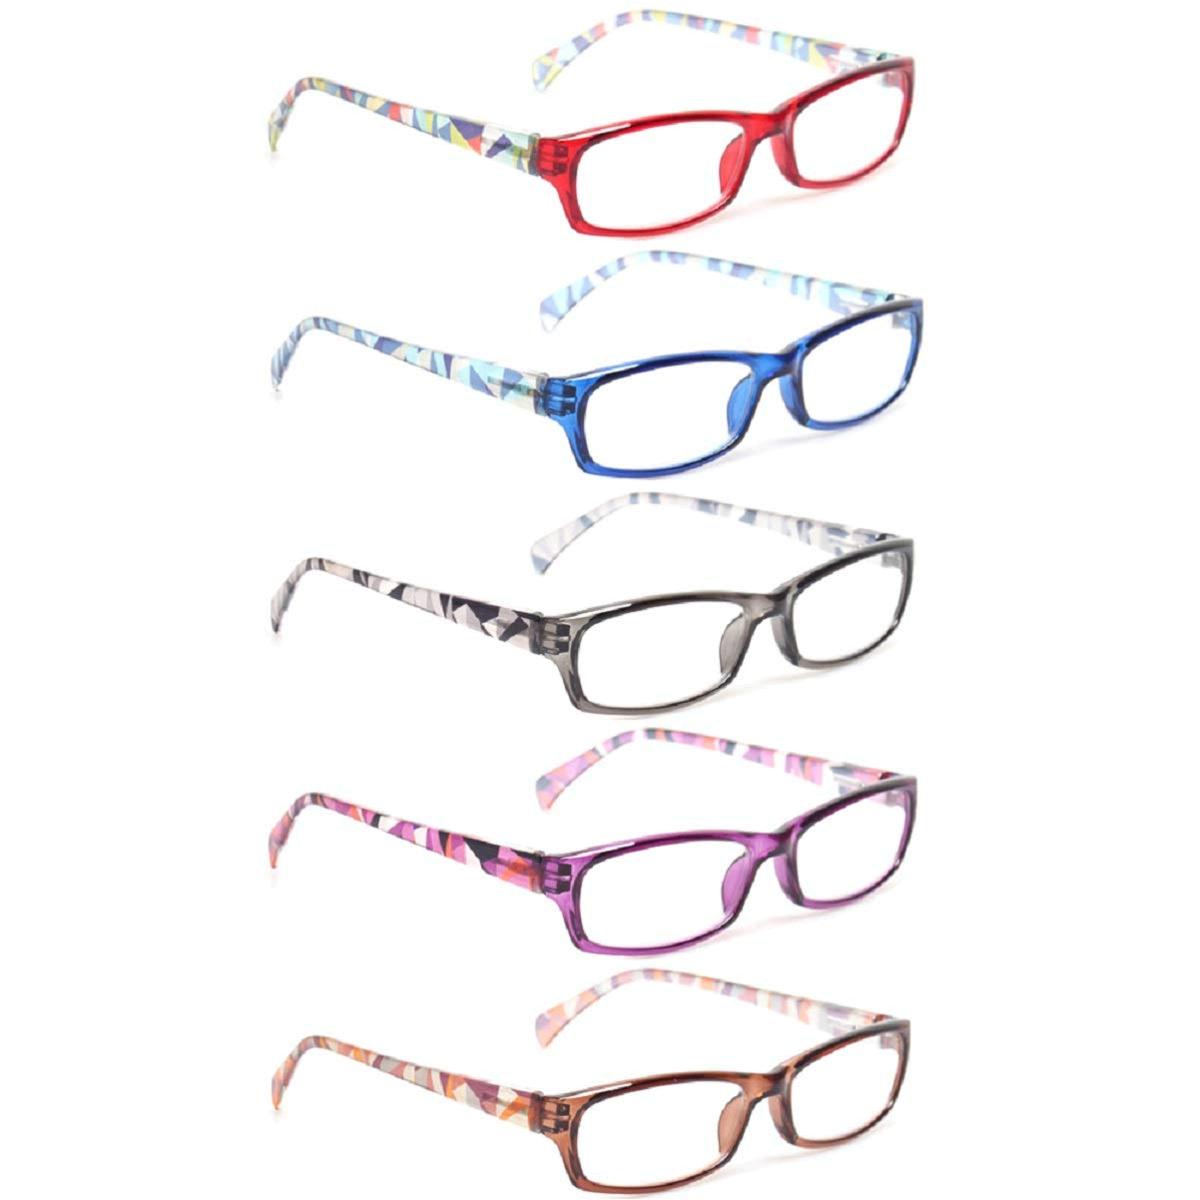 Reading Glasses 5 Pairs Fashion Ladies Readers Spring, MultiColor, Size ...